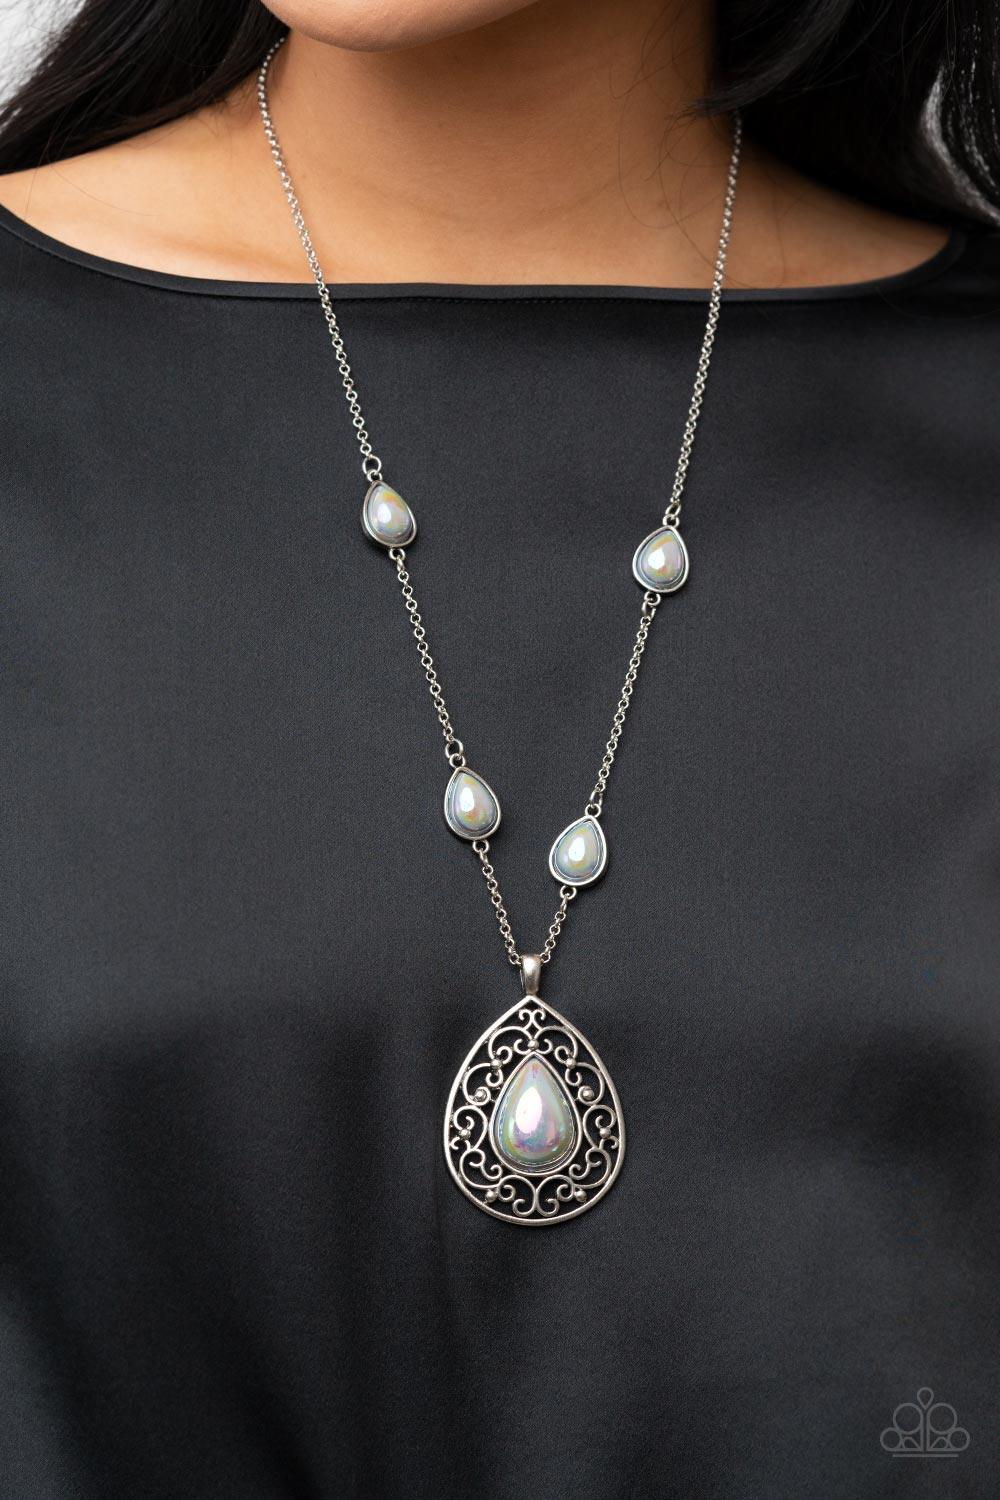 Paparazzi Accessories Magical Masquerade - Silver Brushed in an iridescent finish, a silvery teardrop bead is pressed into the center of an oversized silver teardrop frame that is bursting with vine-like filigree. Infused with matching teardrop beaded fra